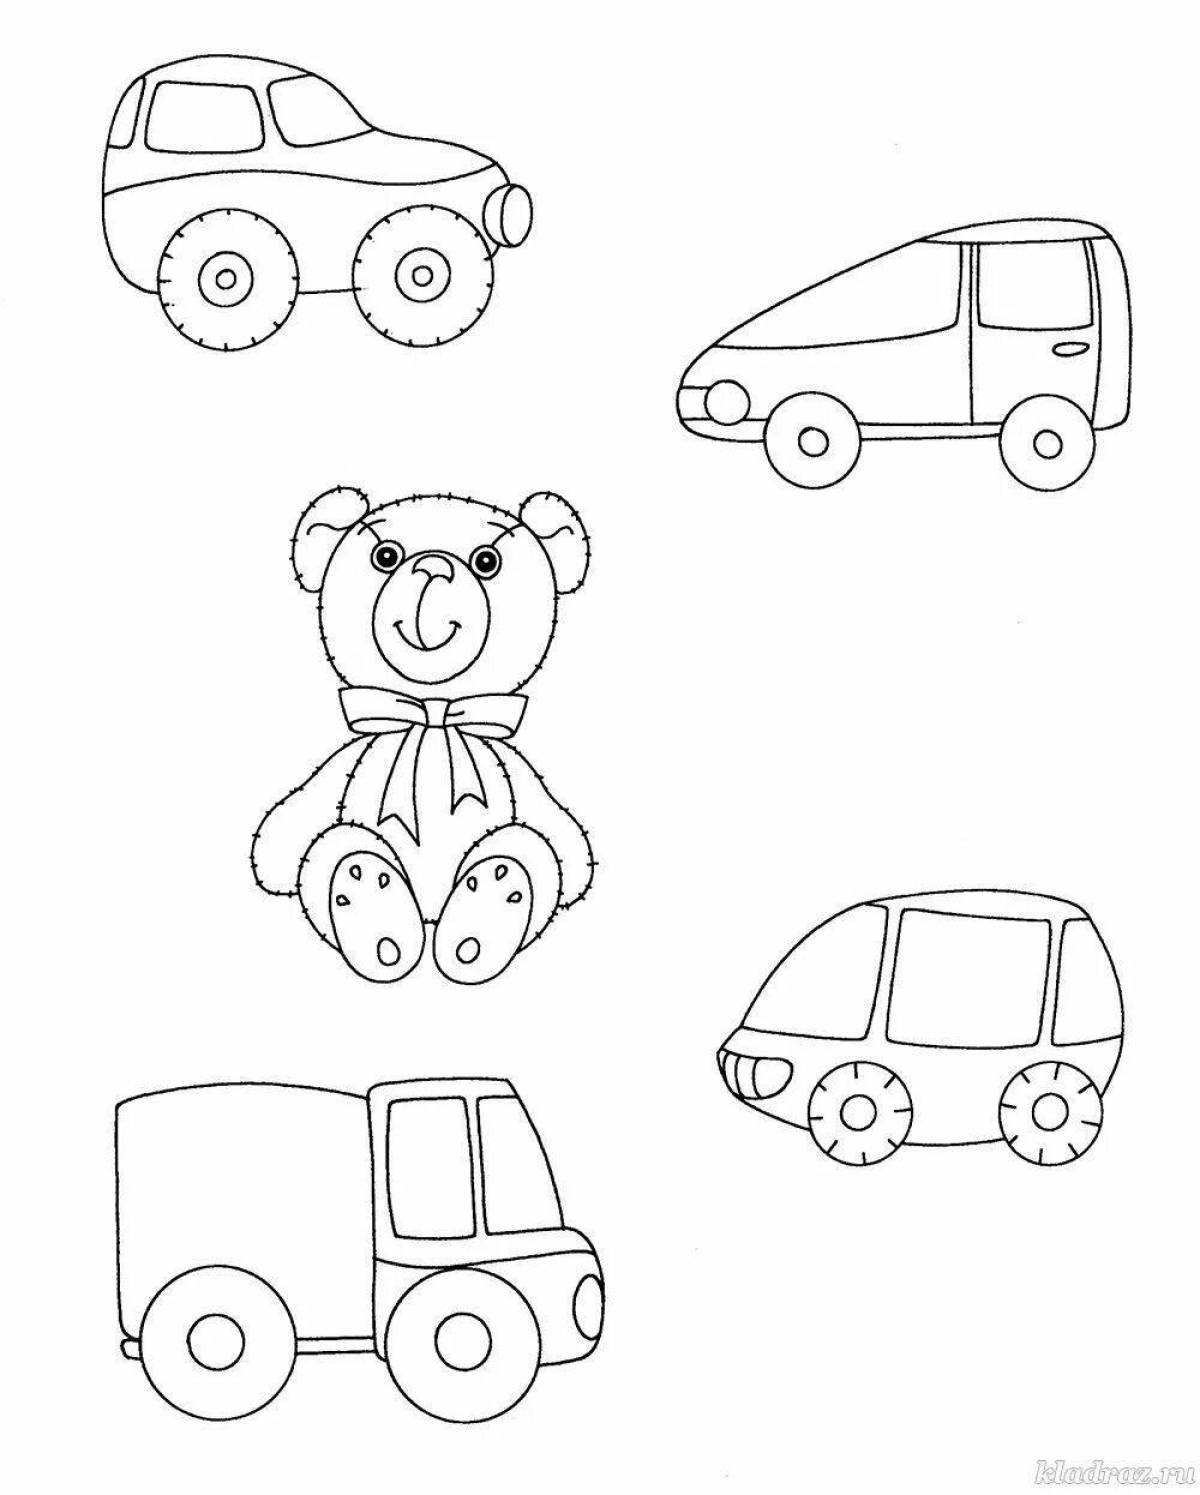 Fun one lot coloring page for kids